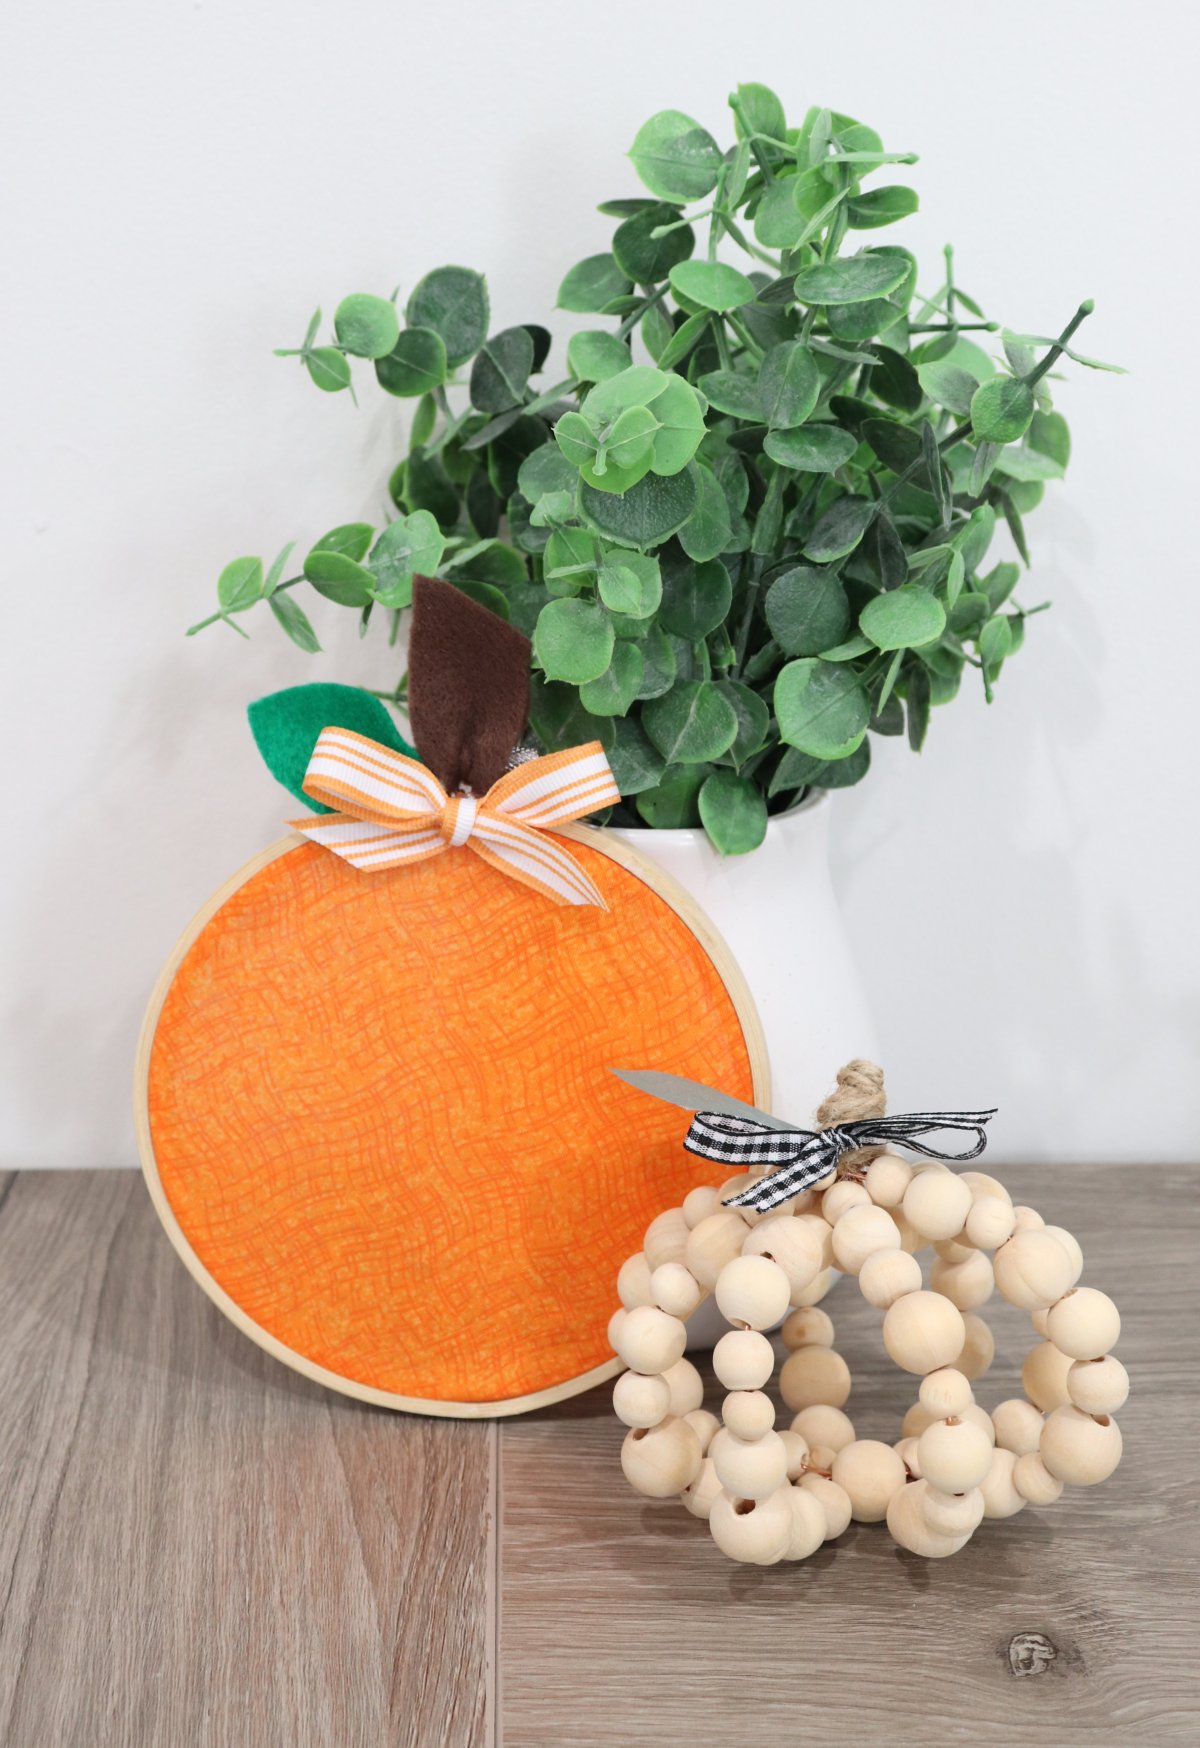 Image contains a pumpkin made from wooden beads, an orange pumpkin made from fabric in an embroidery hoop, and a white vase with faux eucalyptus.